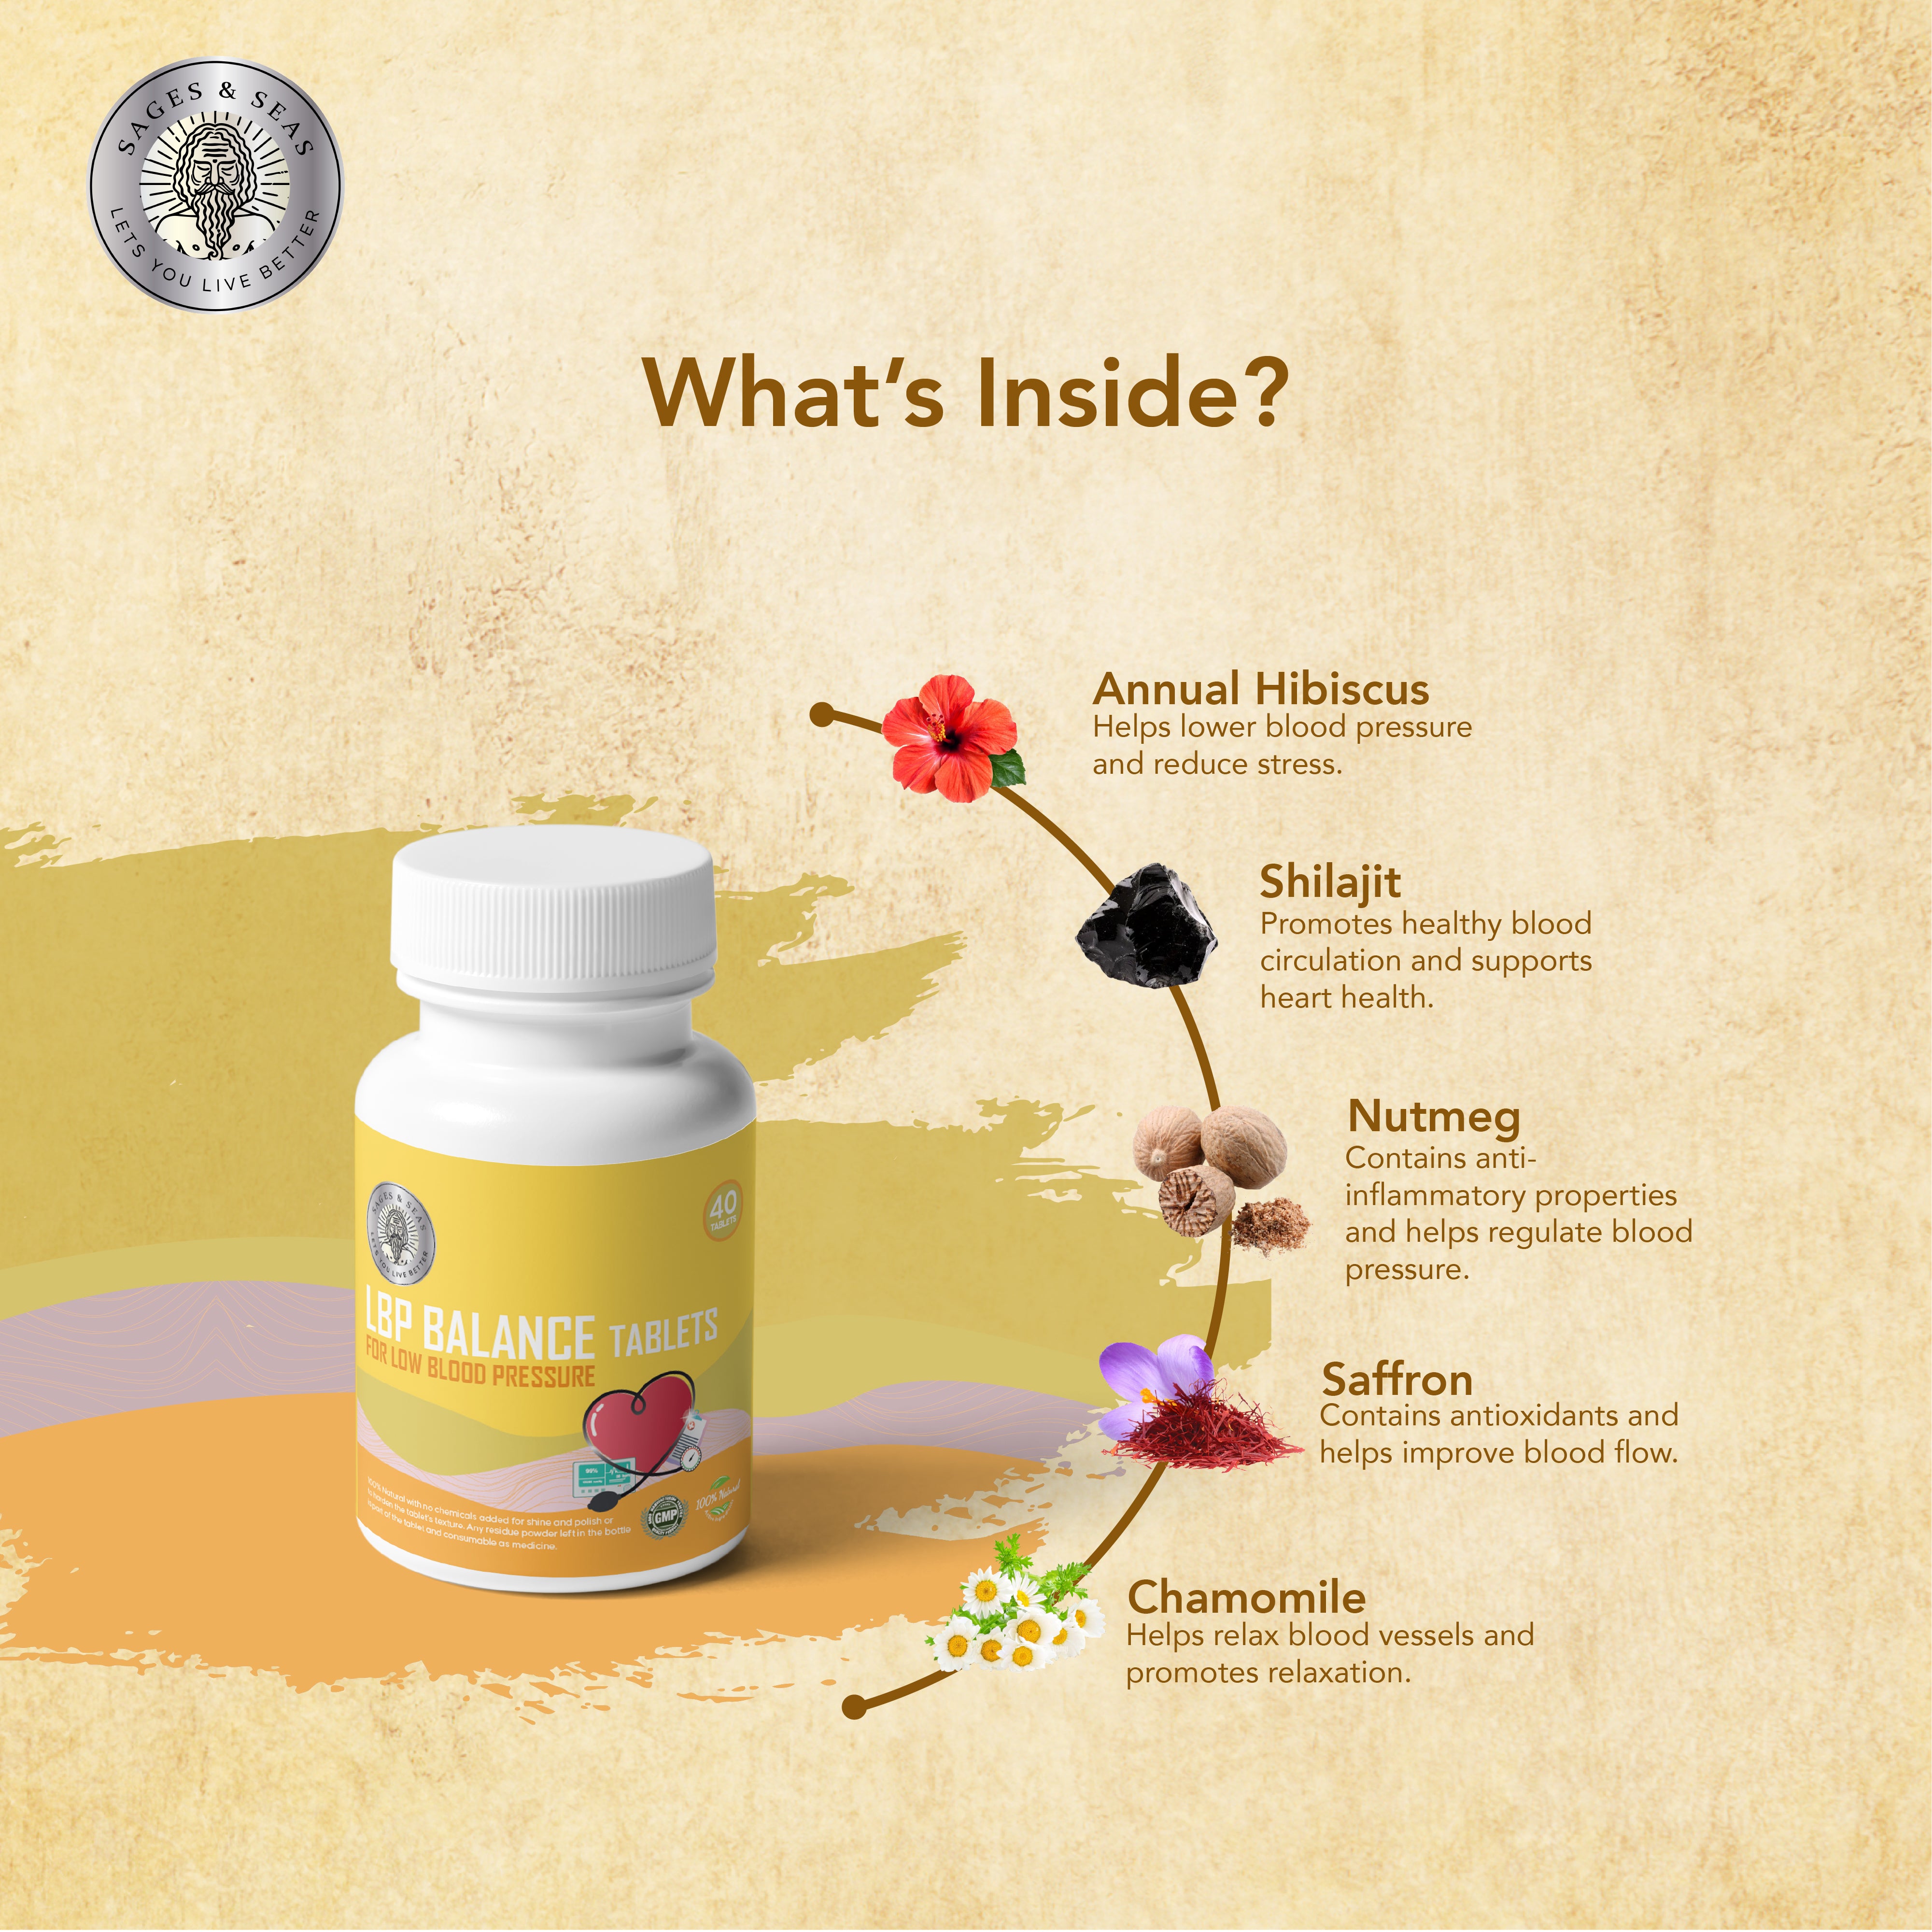 LBP Balance Tablets - HERBS AND HILLS